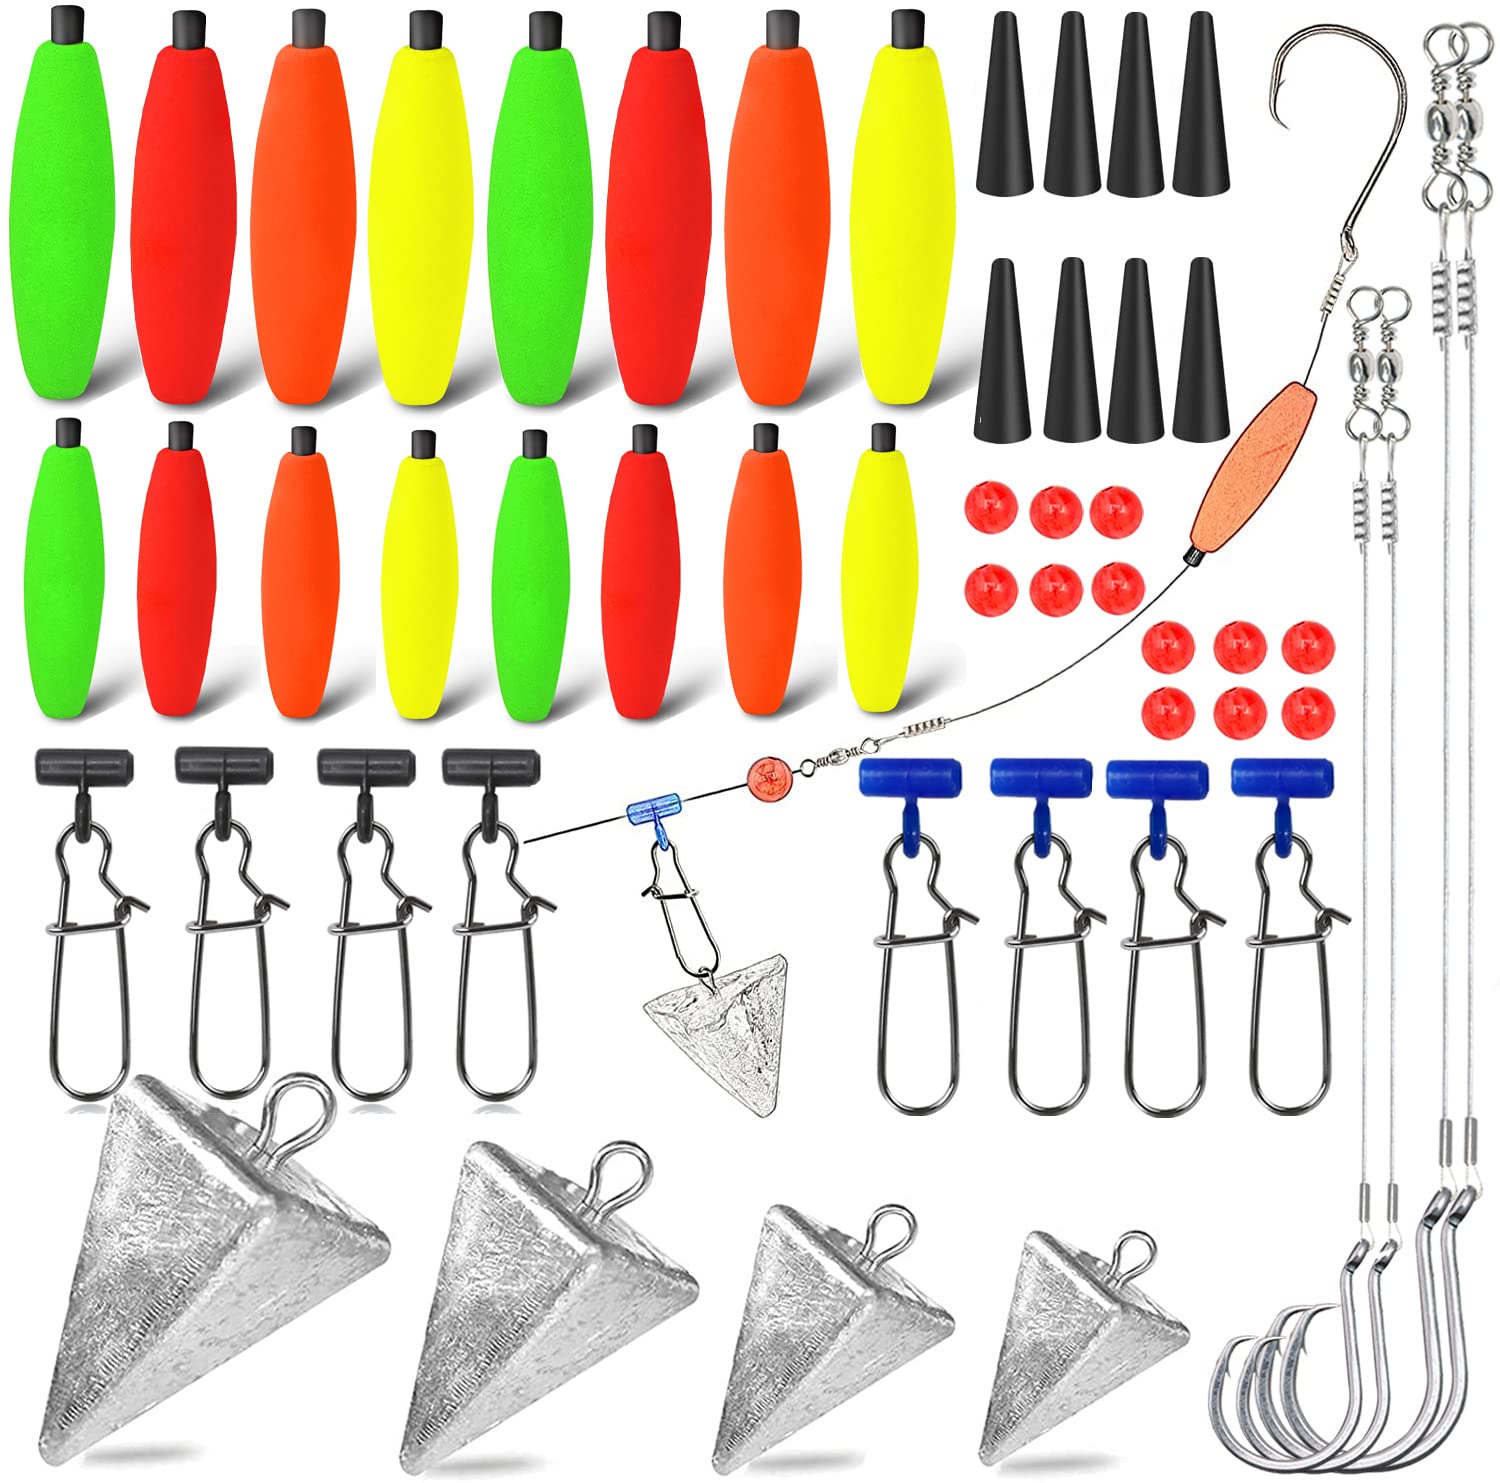 OROOTL Saltwater Fishing Gear Kit, 175pcs Surf Fishing Gear Tackle Box  Include Ocean Fishing Rigs Pompano Floats Pyramid Weights Sinker Slides